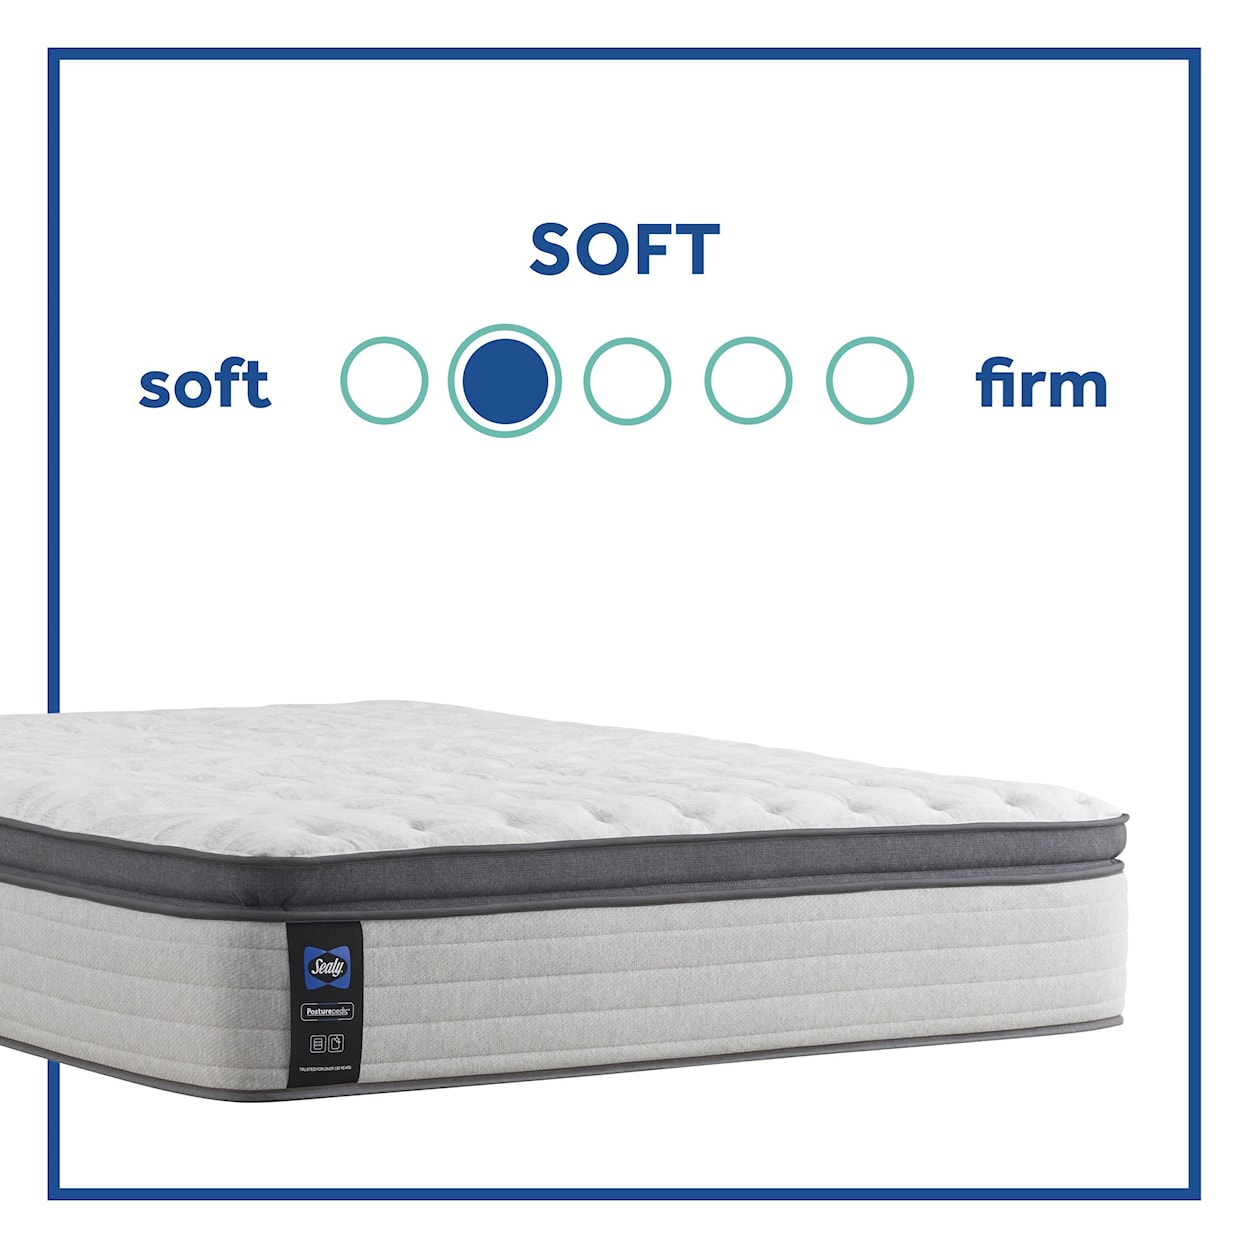 Sealy PPS3 Posturpedic Innerspring Soft EPT Twin XL 14" Soft Euro Pillow Top Mattress